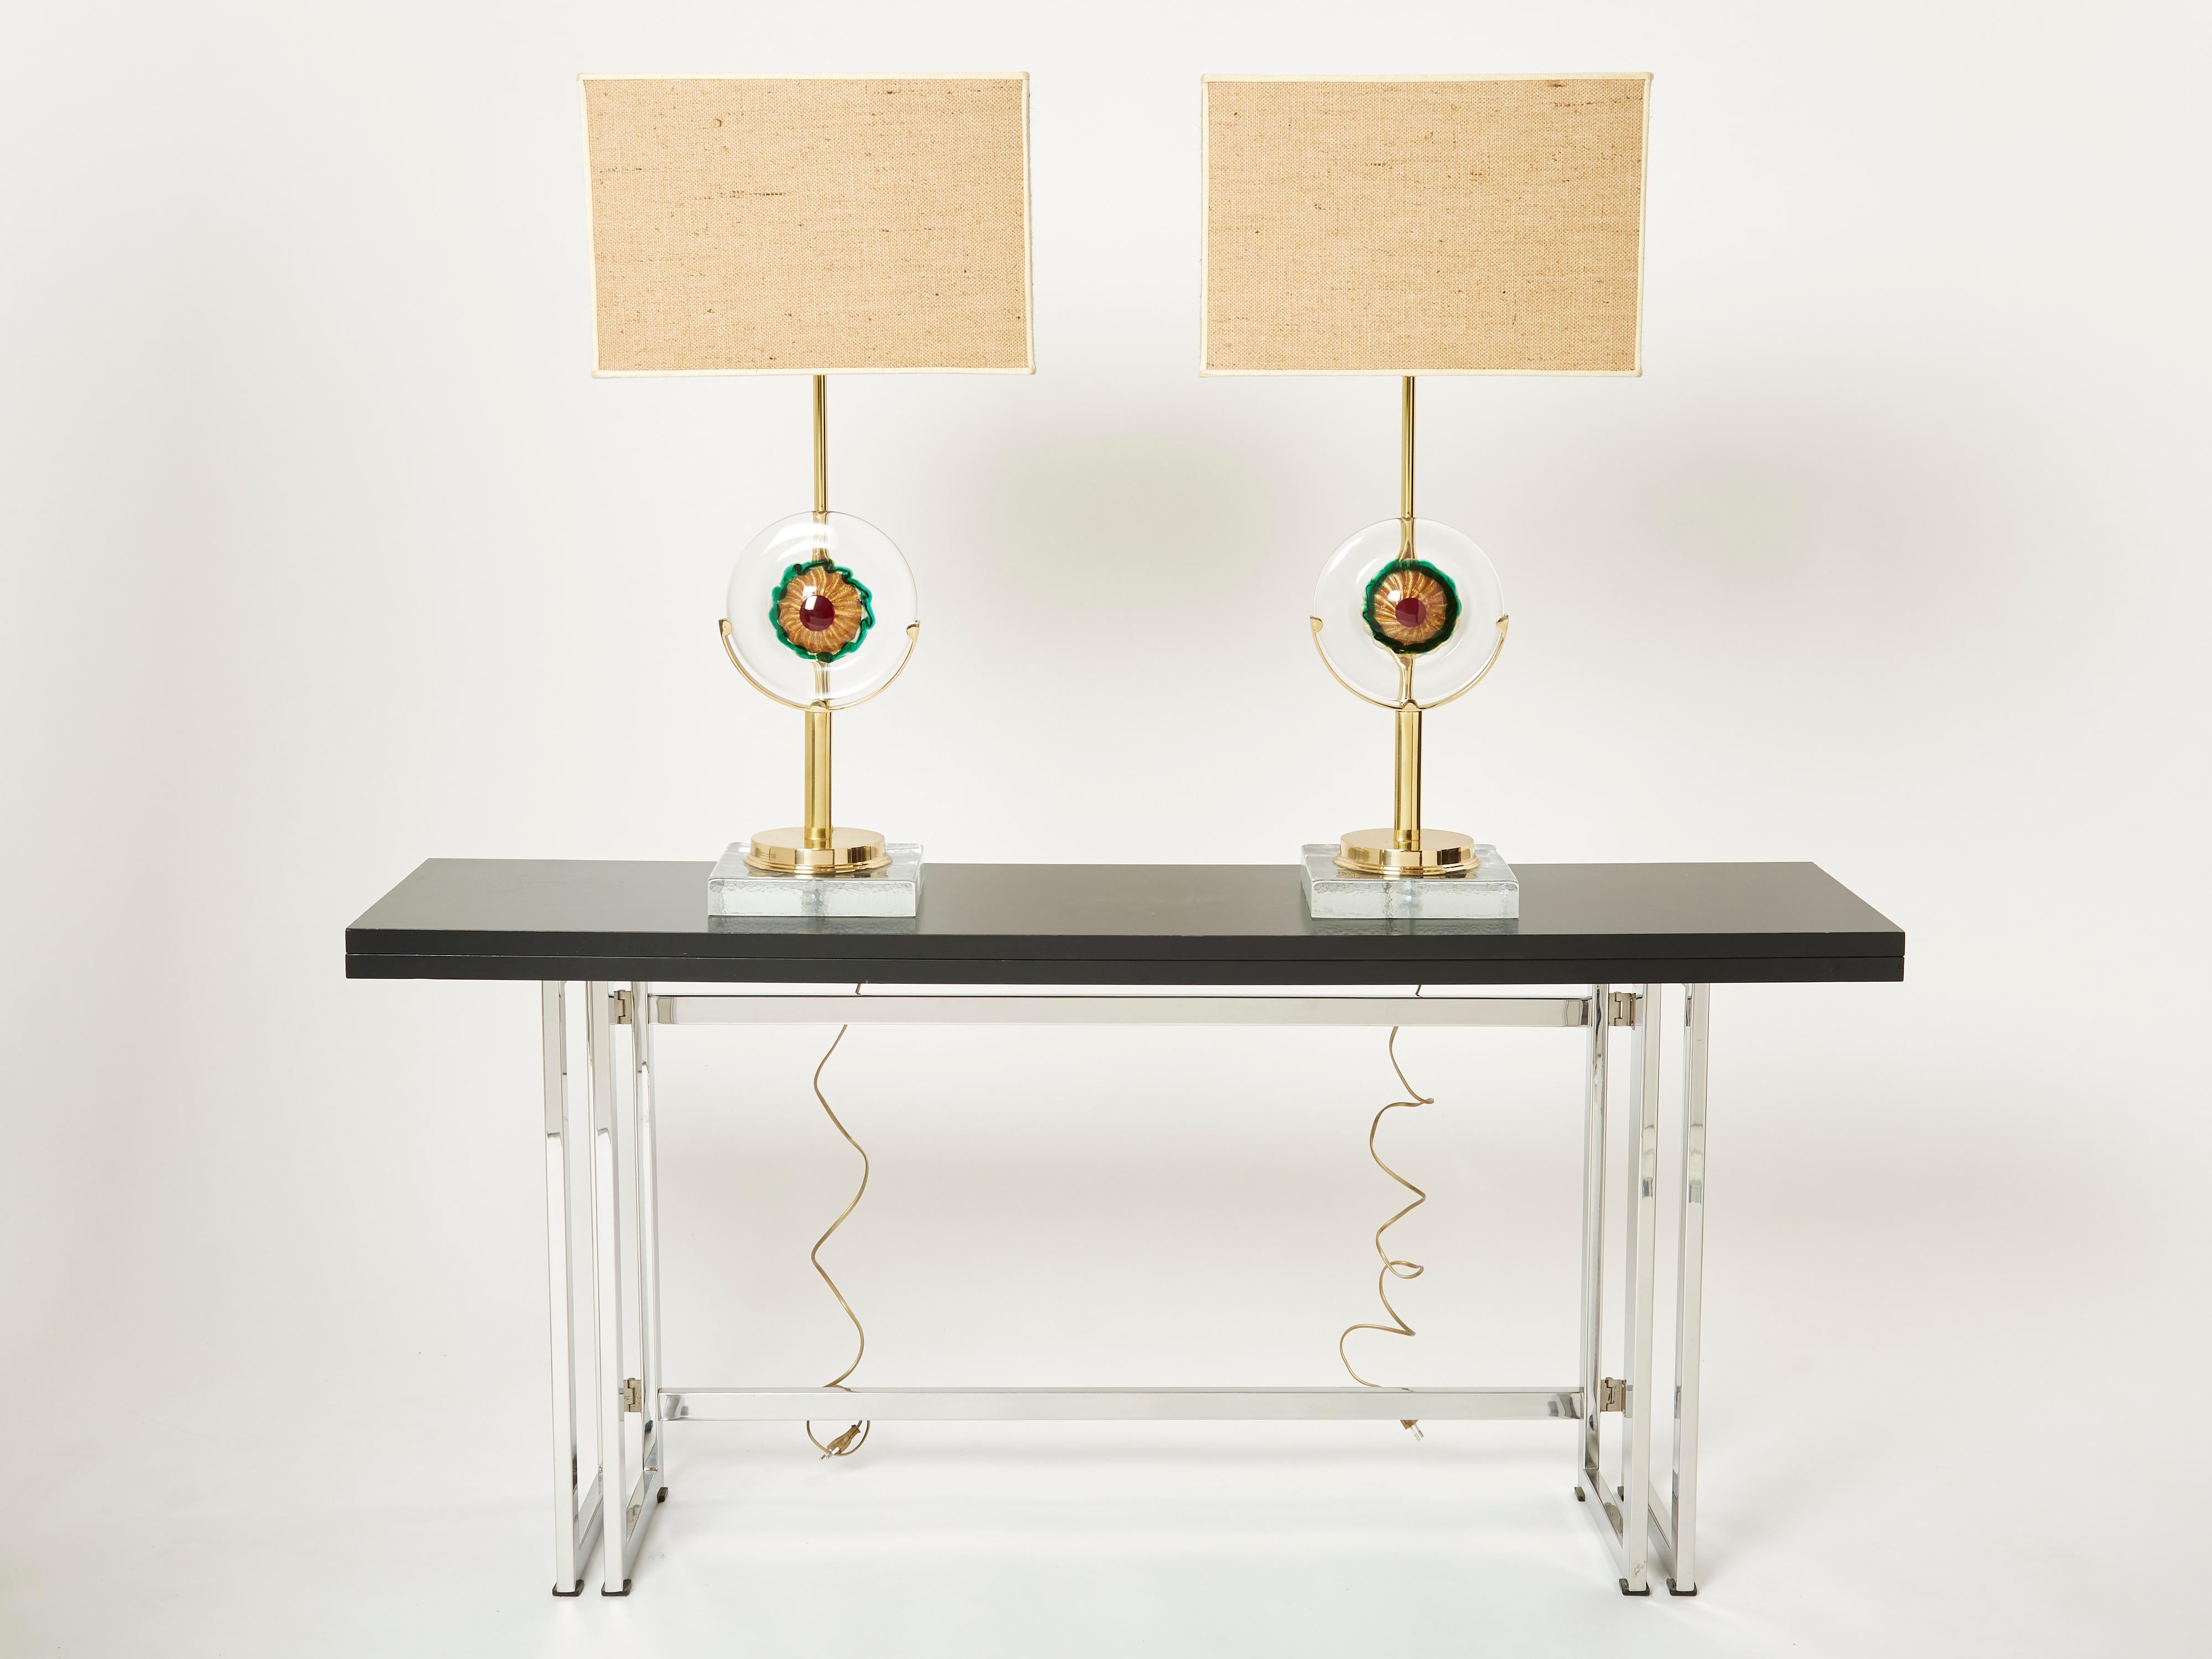 Pair of Italian Murano Glass Brass Rattan Table Lamps, 1970s For Sale 4